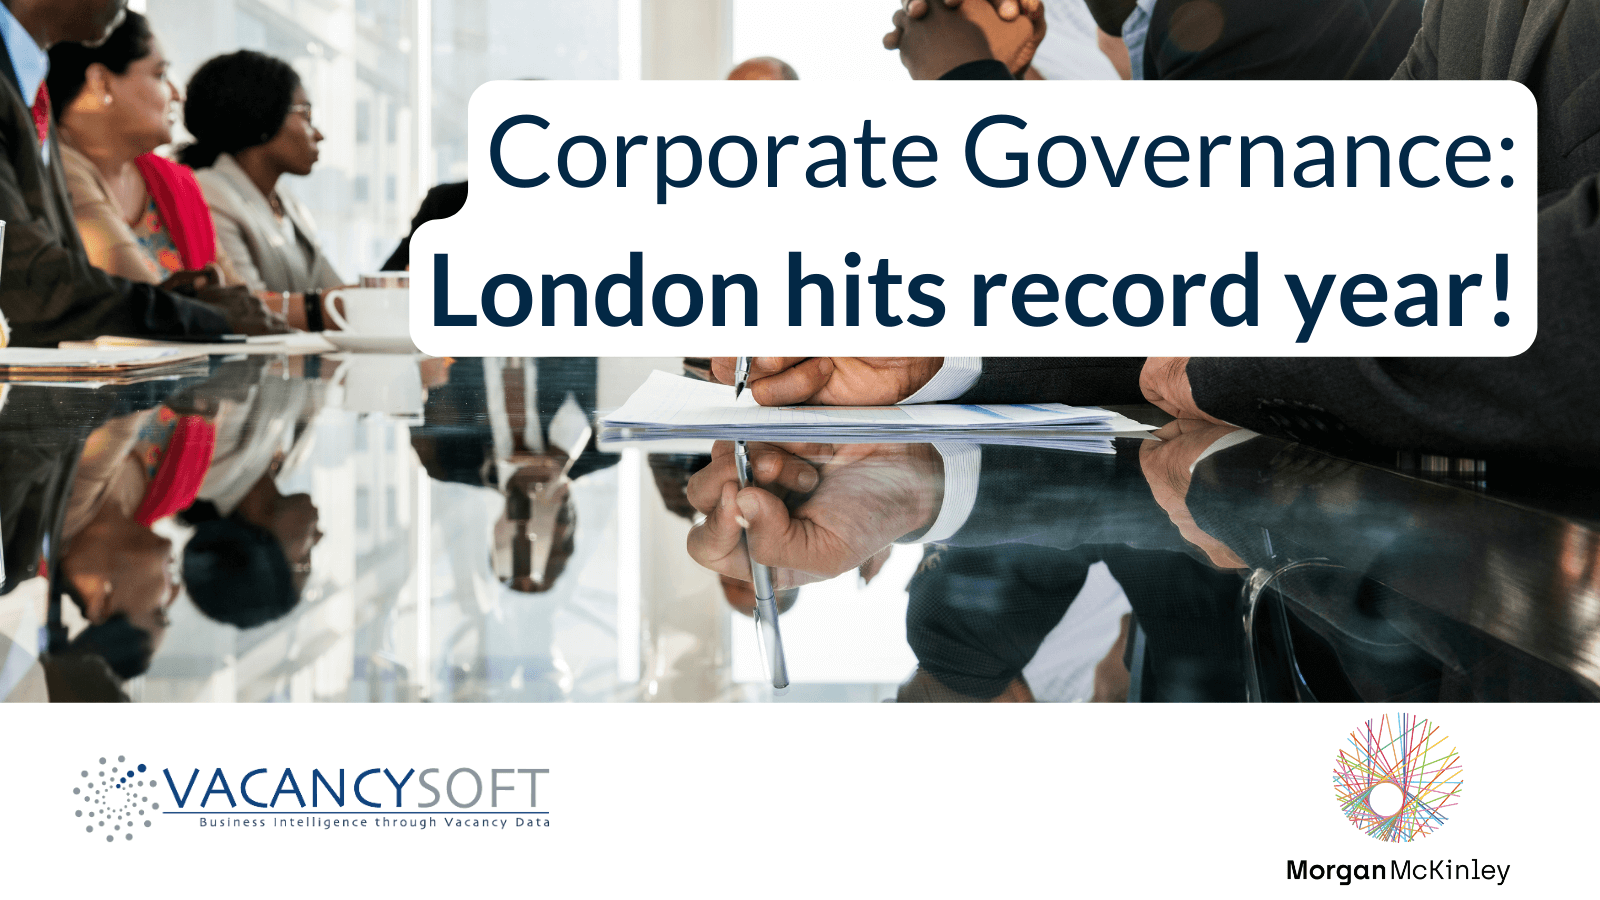 2023 Review: London hits record year for corporate governance vacancies with Barclays at the forefront — New report with Morgan McKinley